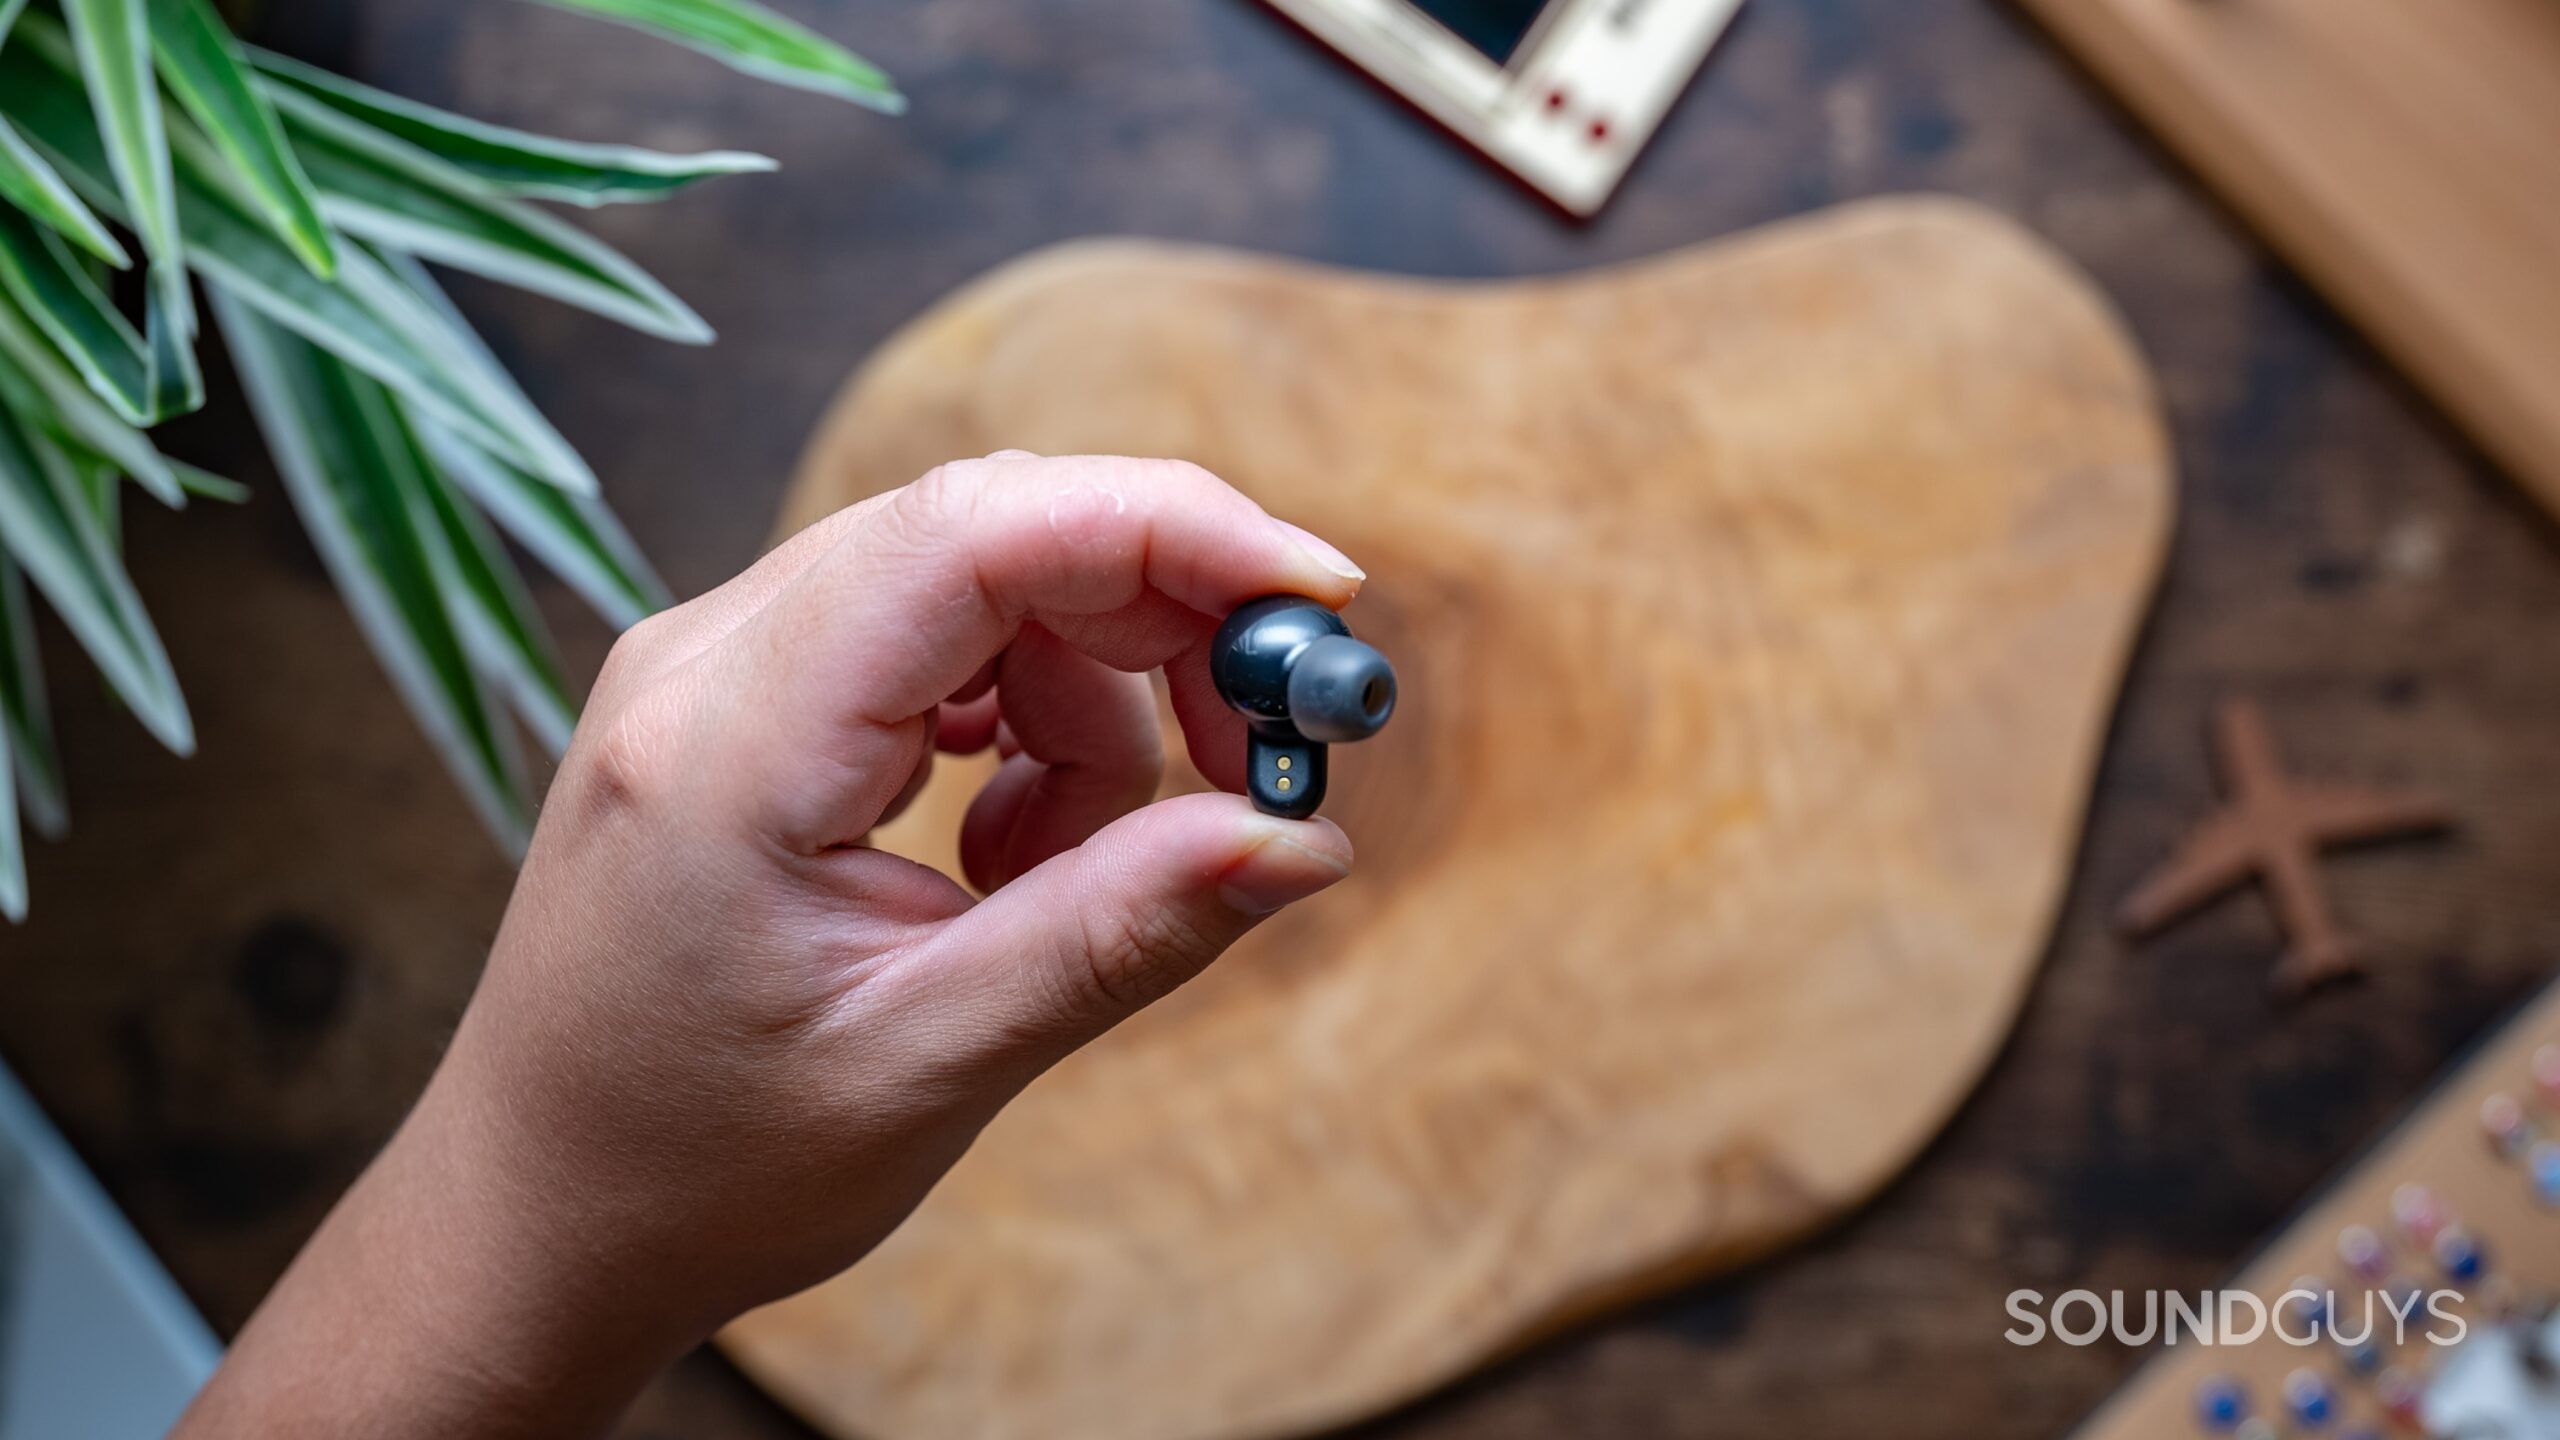 The Skullcandy Dime 3 earbuds held in a hand above a table. 